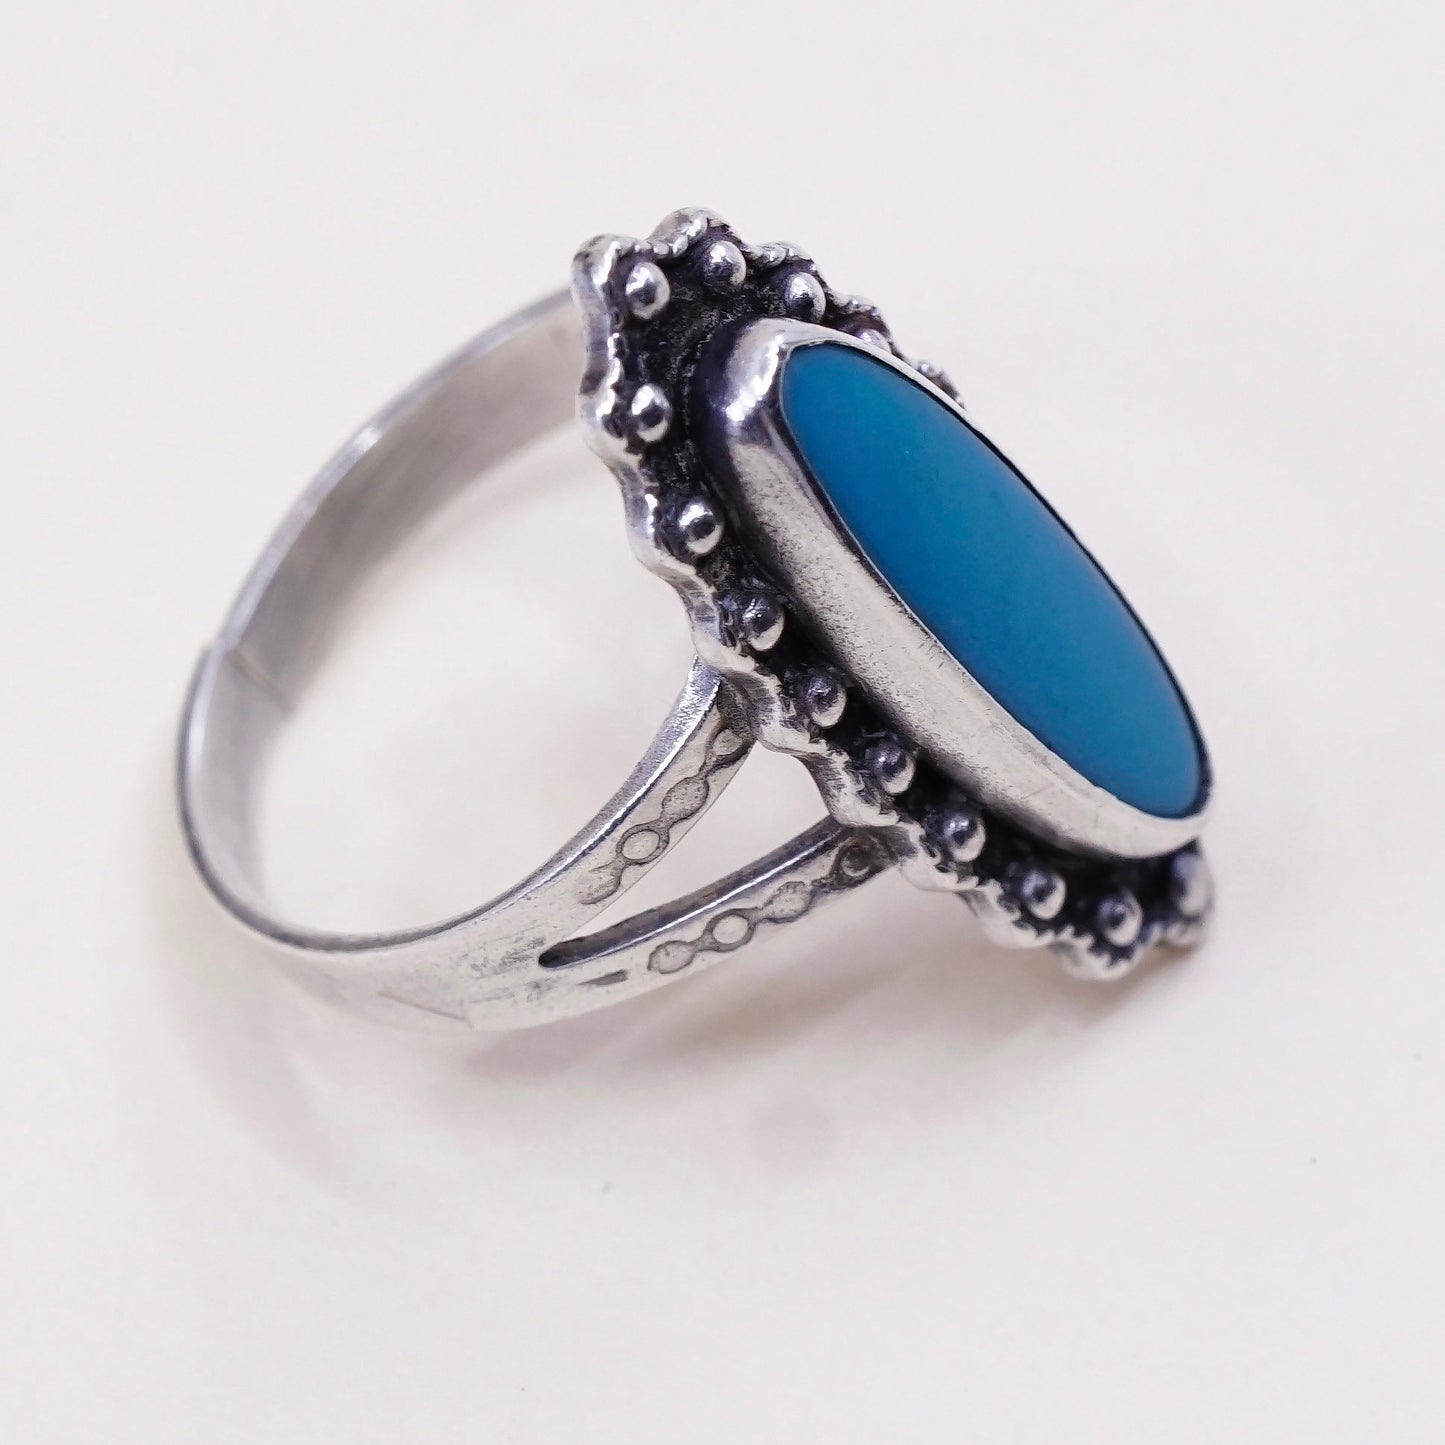 sz 7.25, Vintage sterling silver Native American handmade 925 ring w/ turquoise